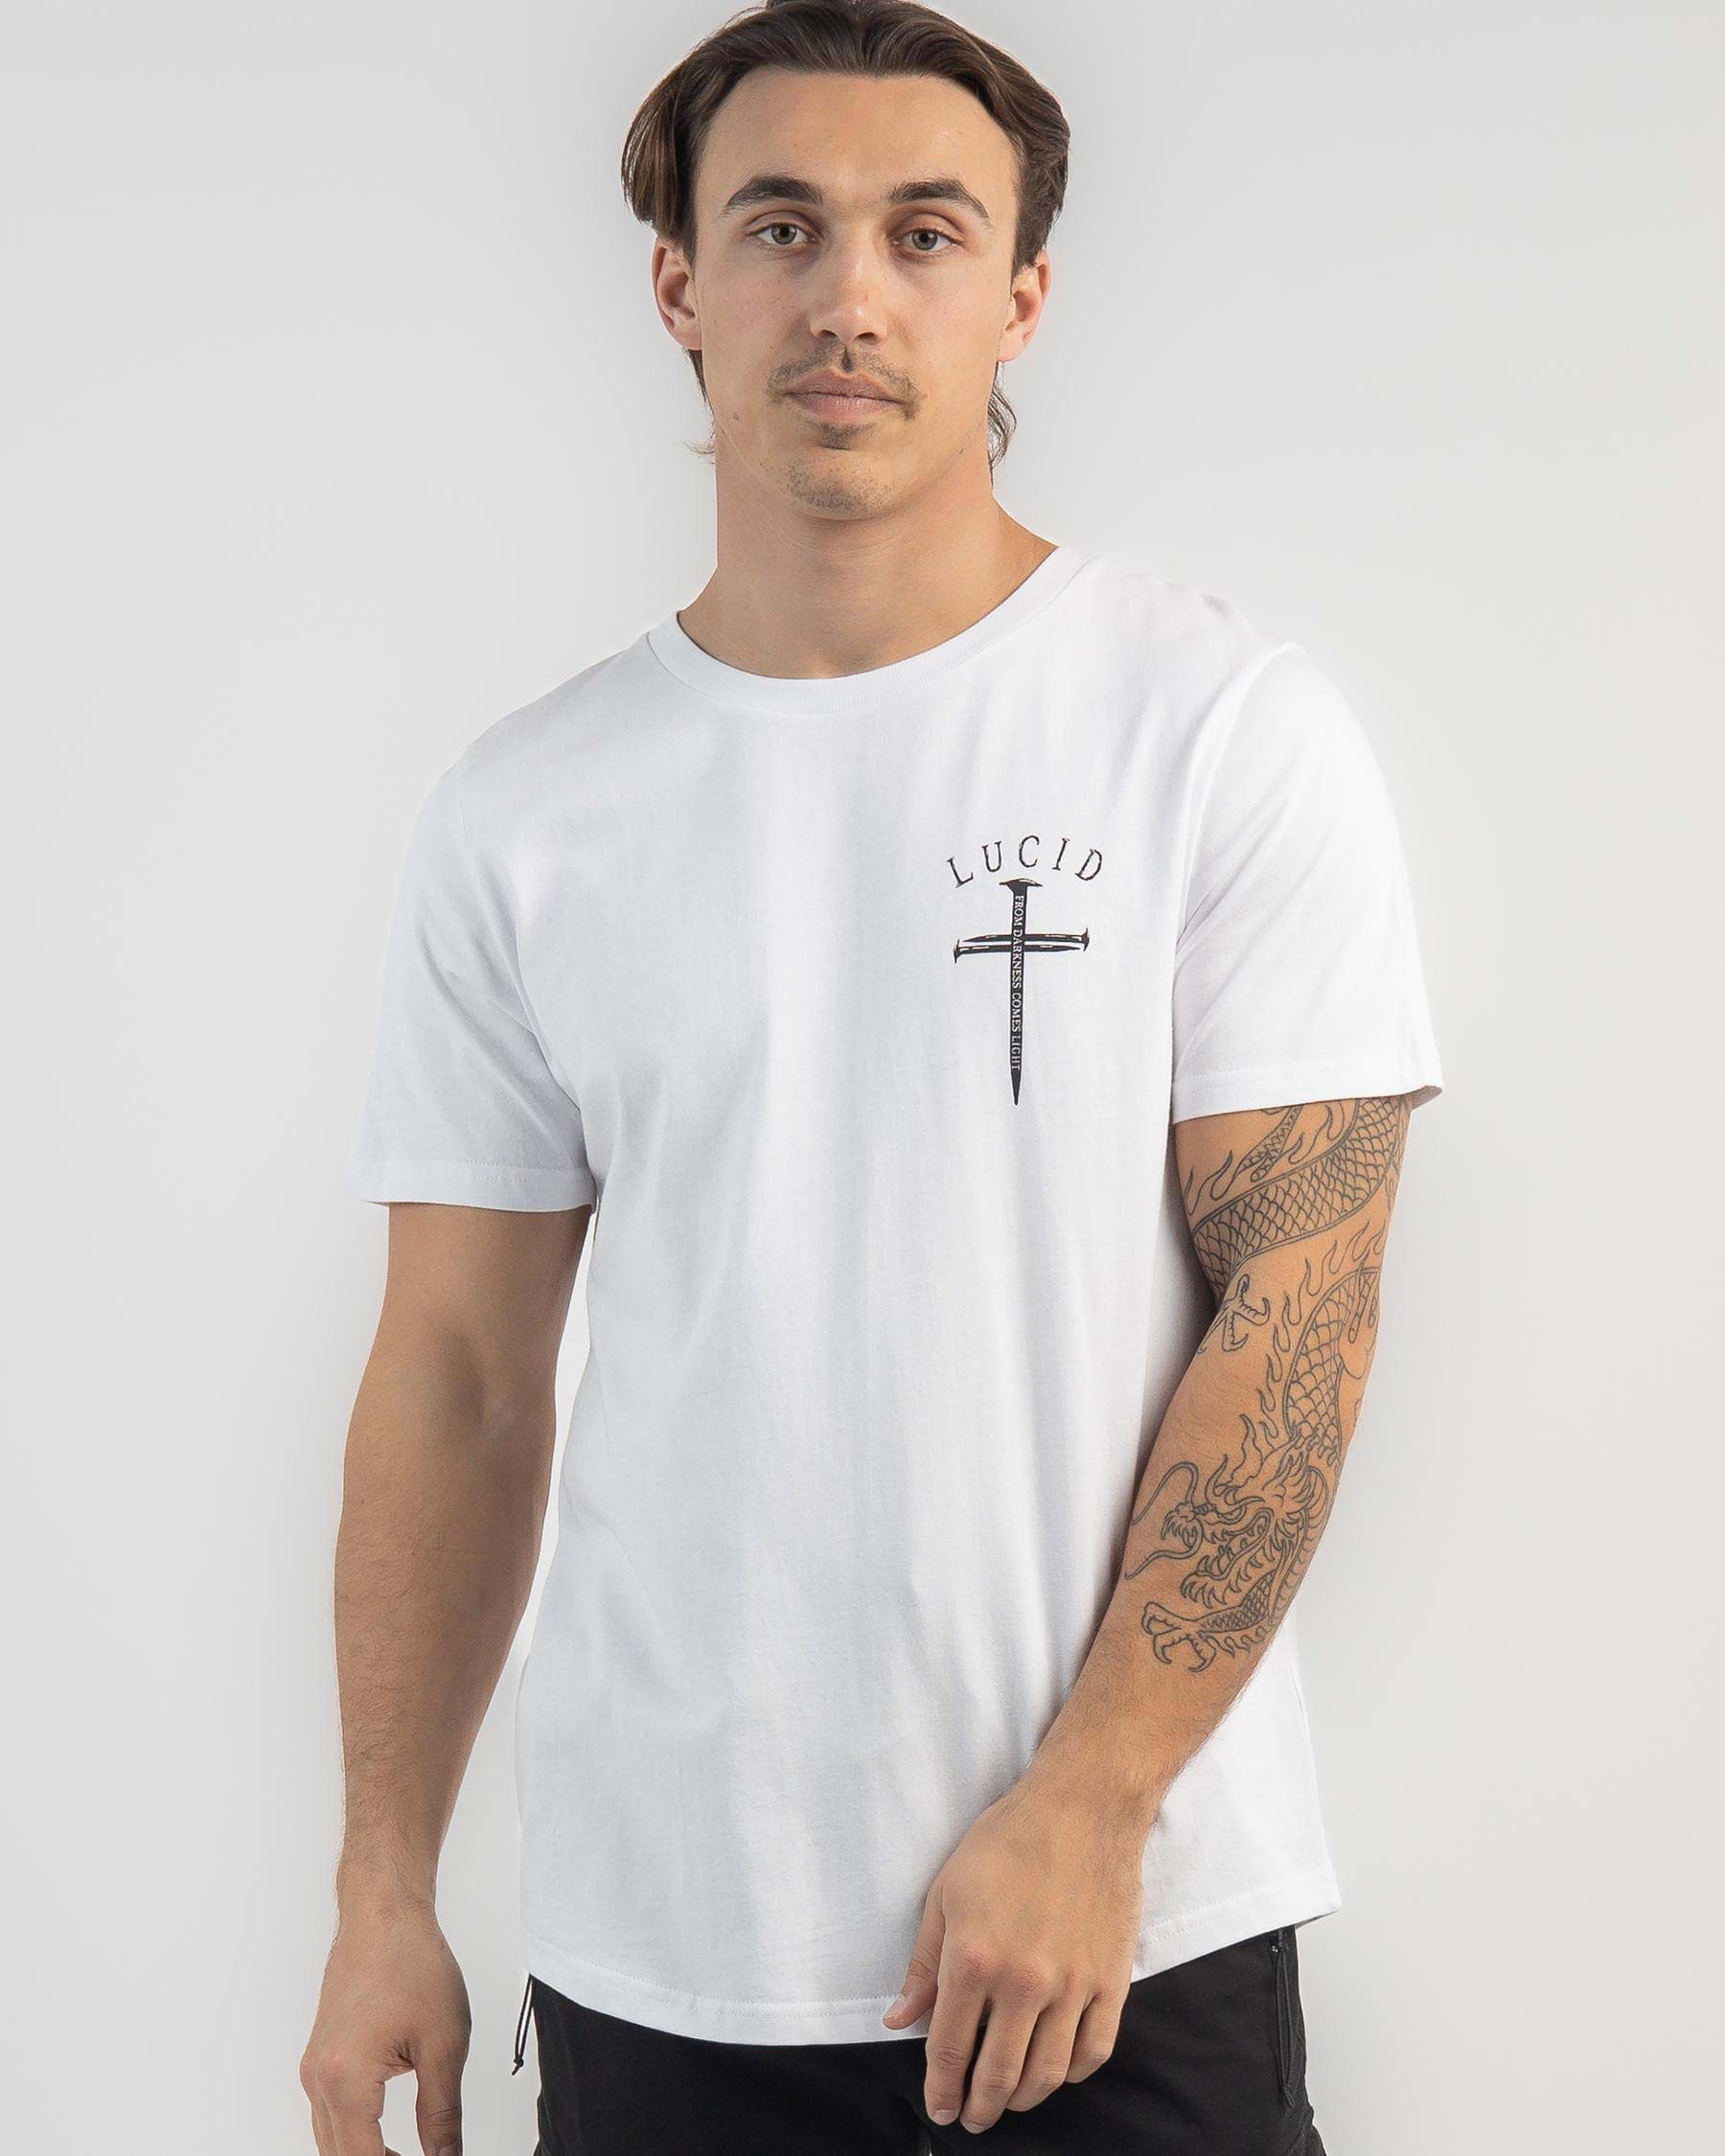 Lucid Essence T-Shirt In White - Fast Shipping & Easy Returns - City ...